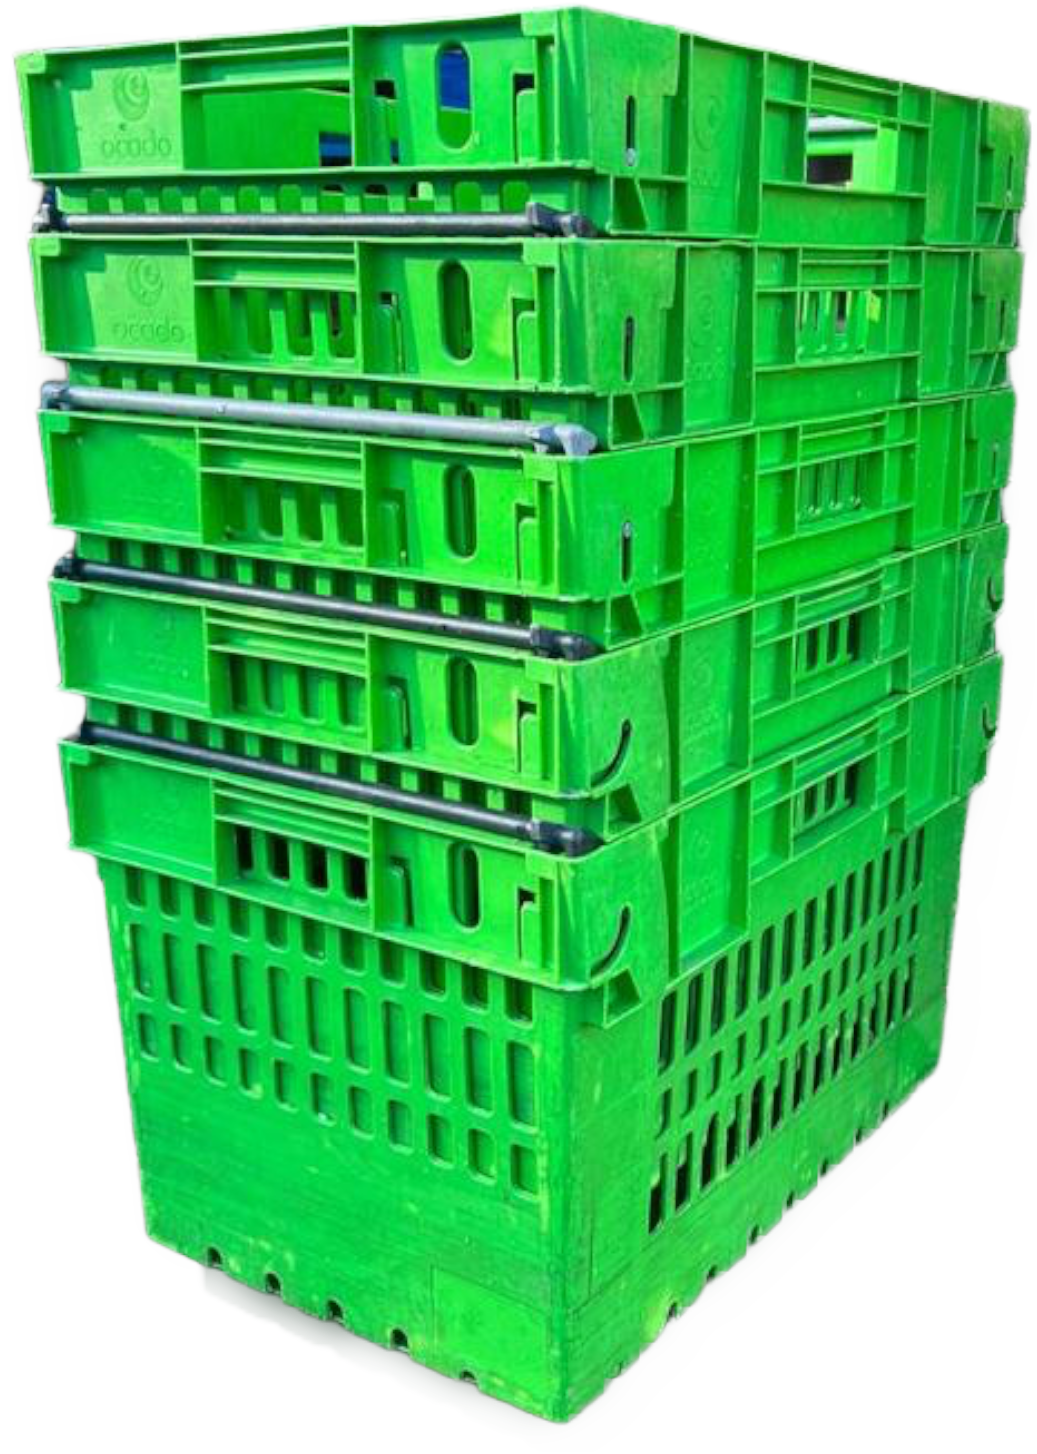 400x300x185 Bale Arm Crate - Black For Supermarkets